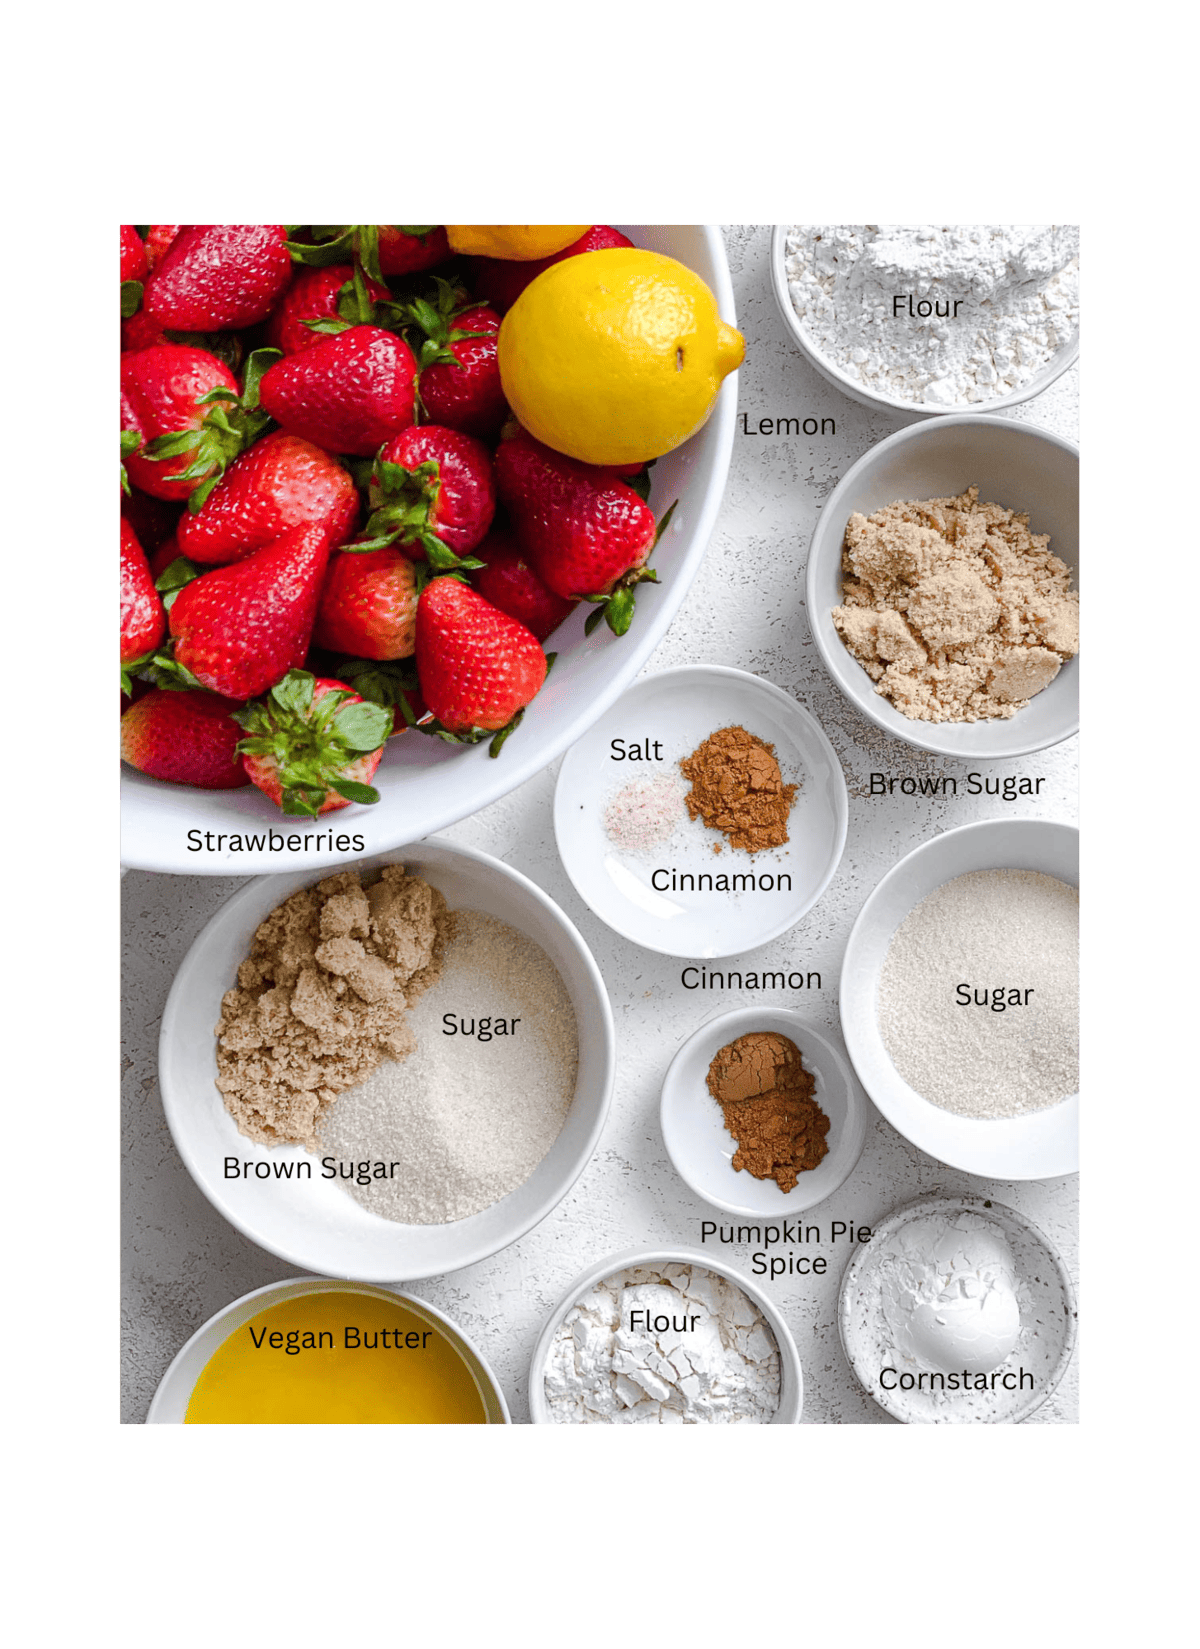 ingredients for Easy Strawberry Crumble measured out against a light surface